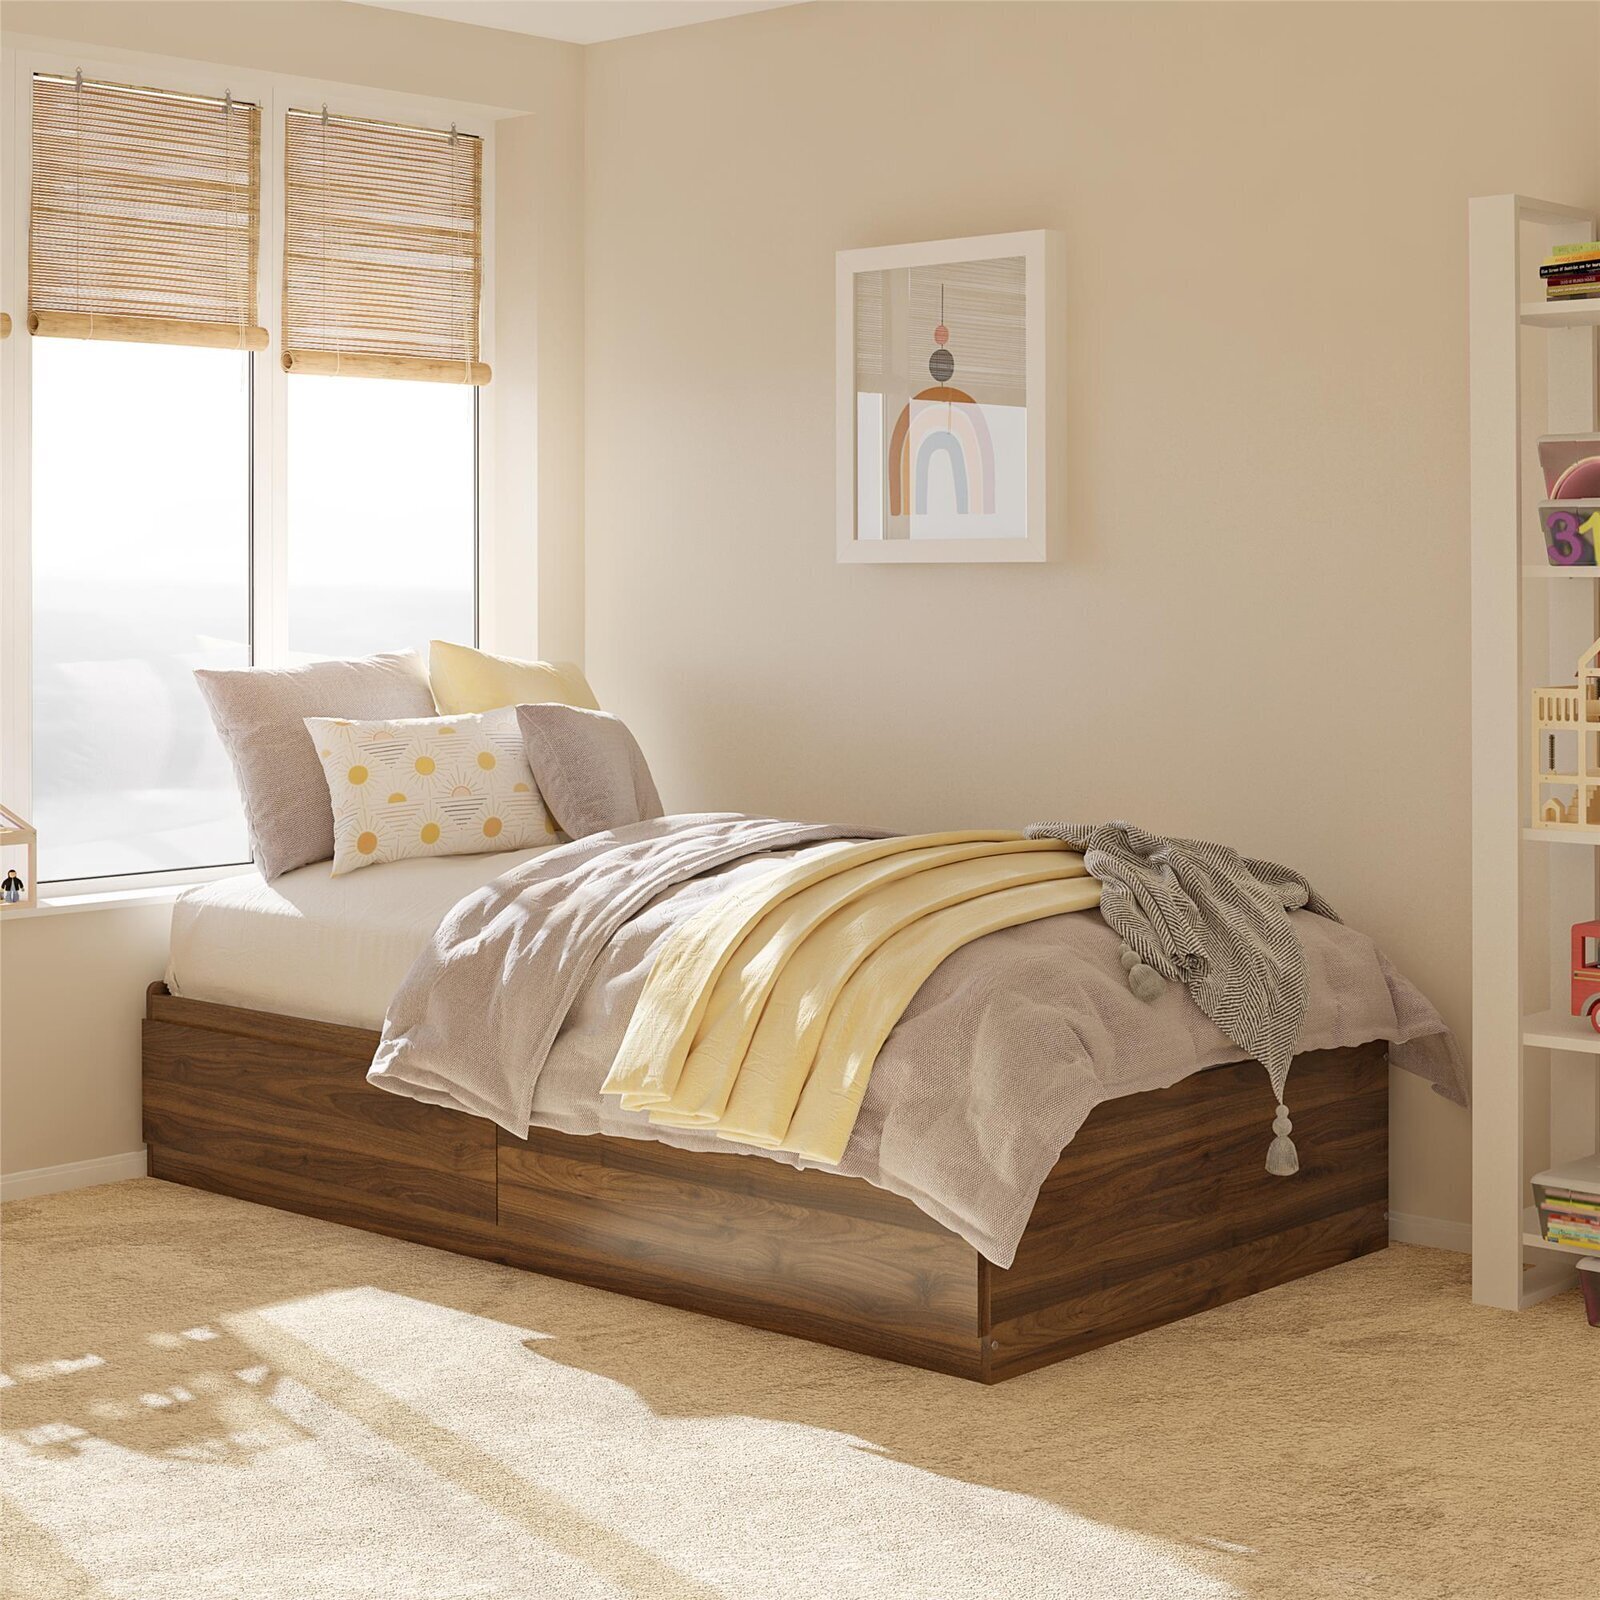 Simple Platform style Solid Wood Captains Bed